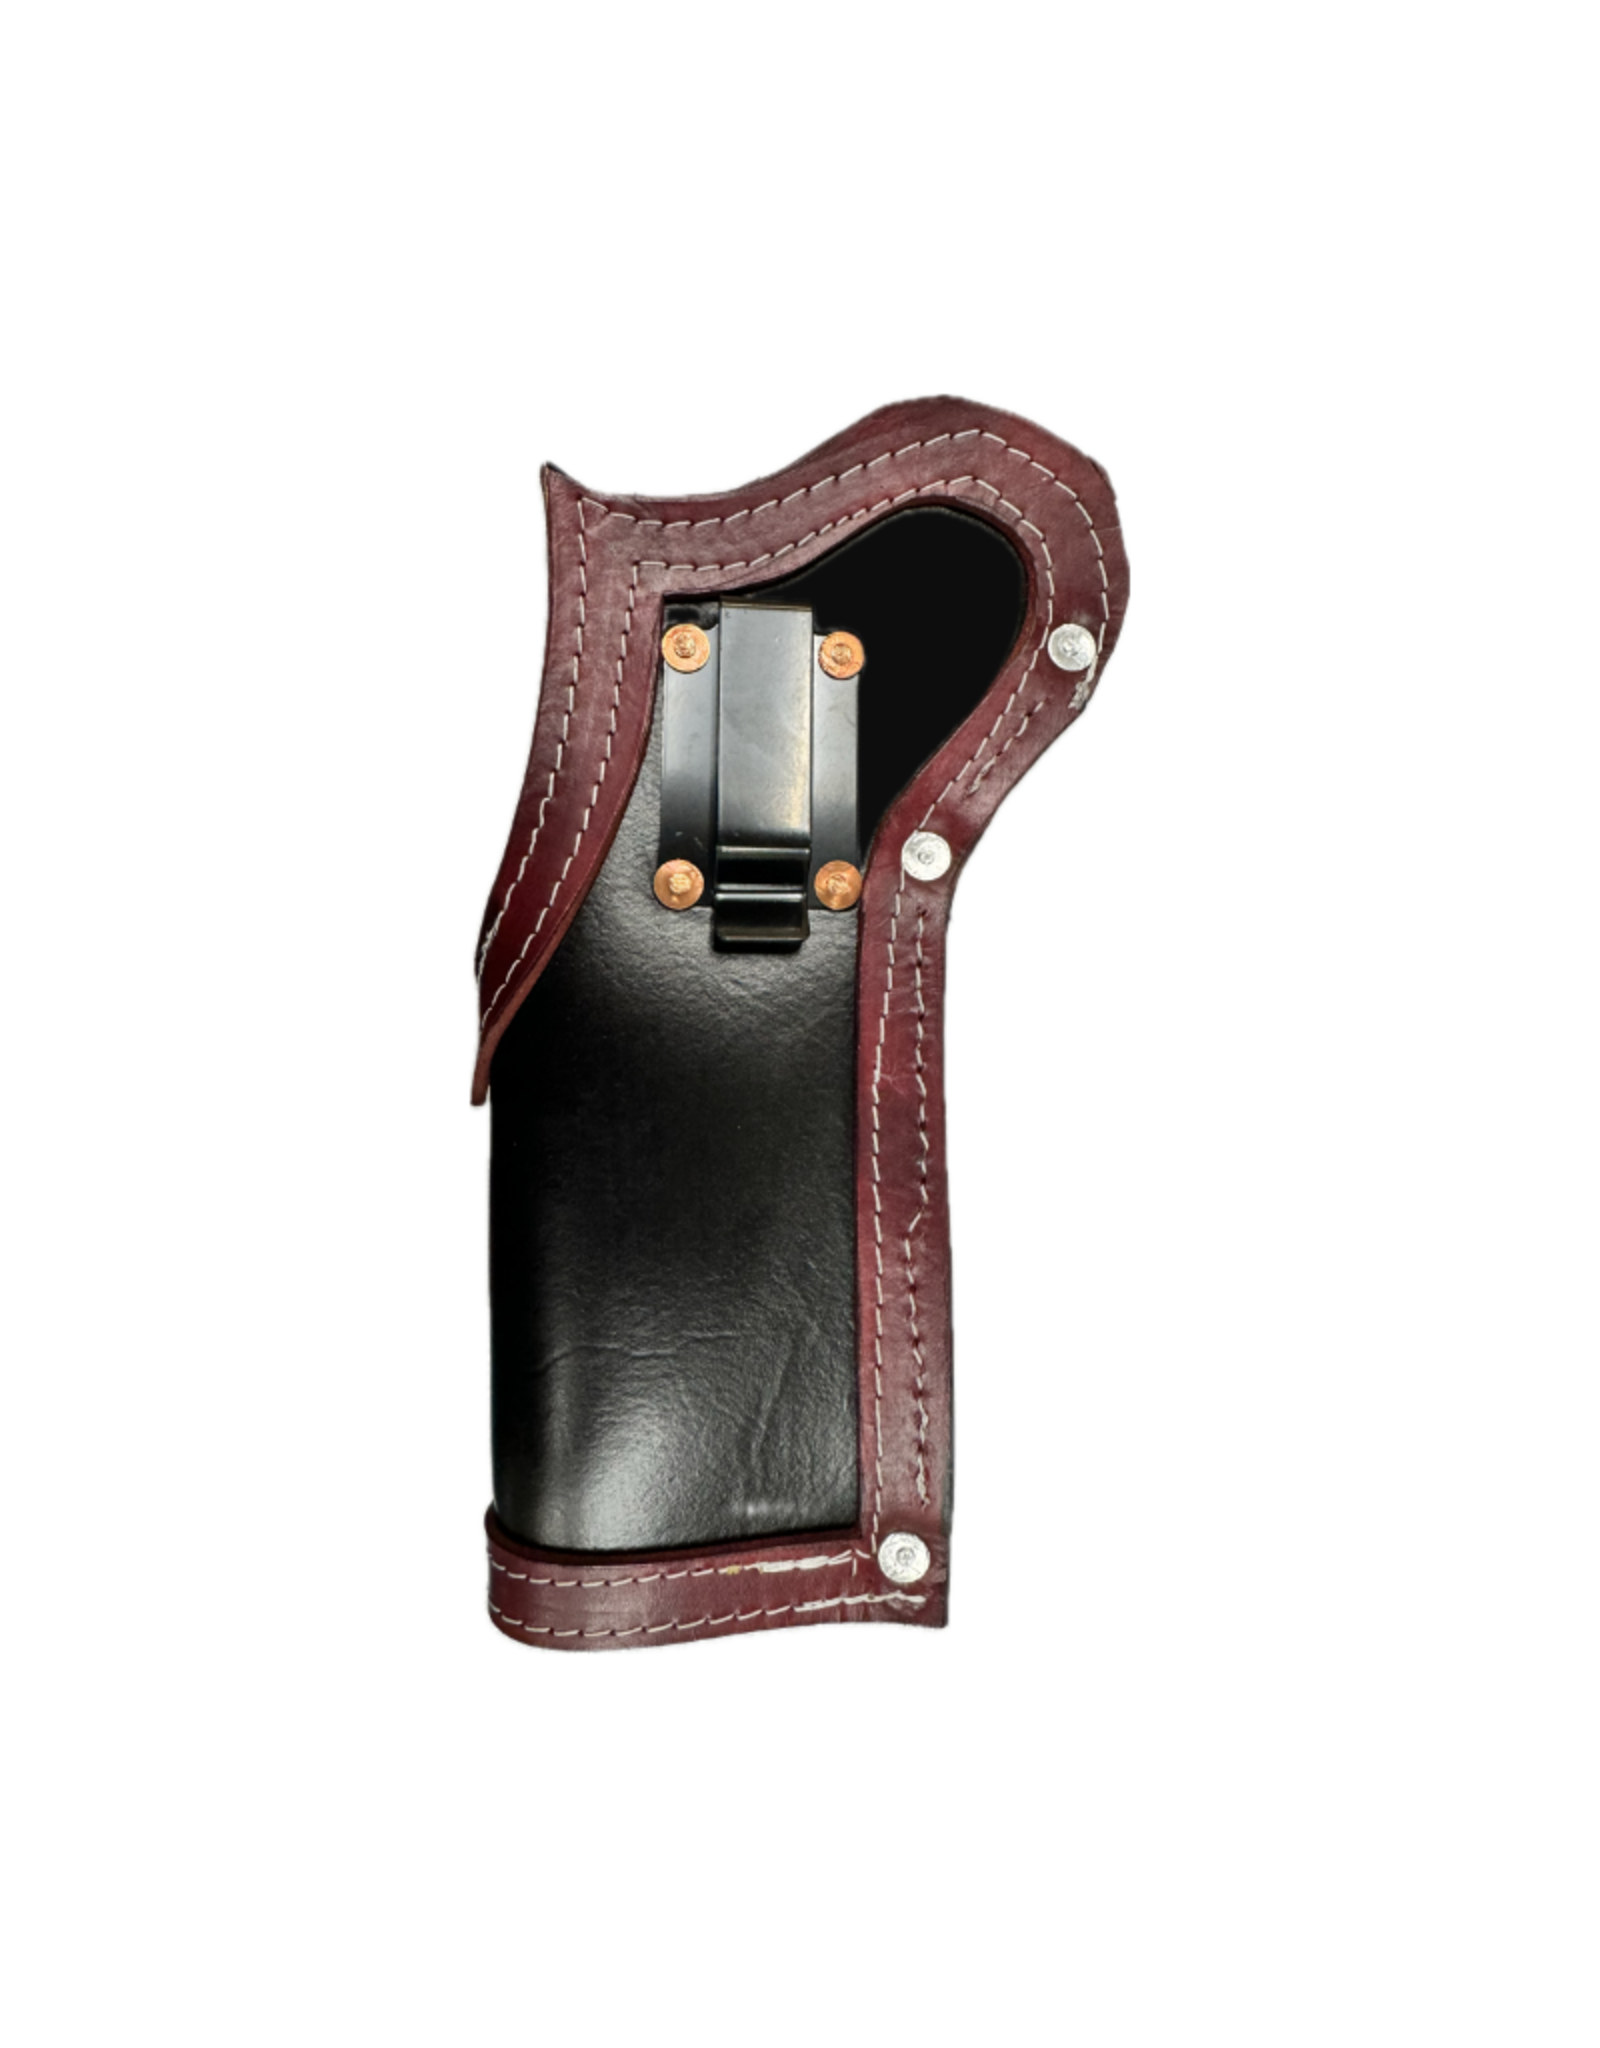 Toomy Leathers Leathers Molded Holster for Huben GK1 | LH | Black/Maroon